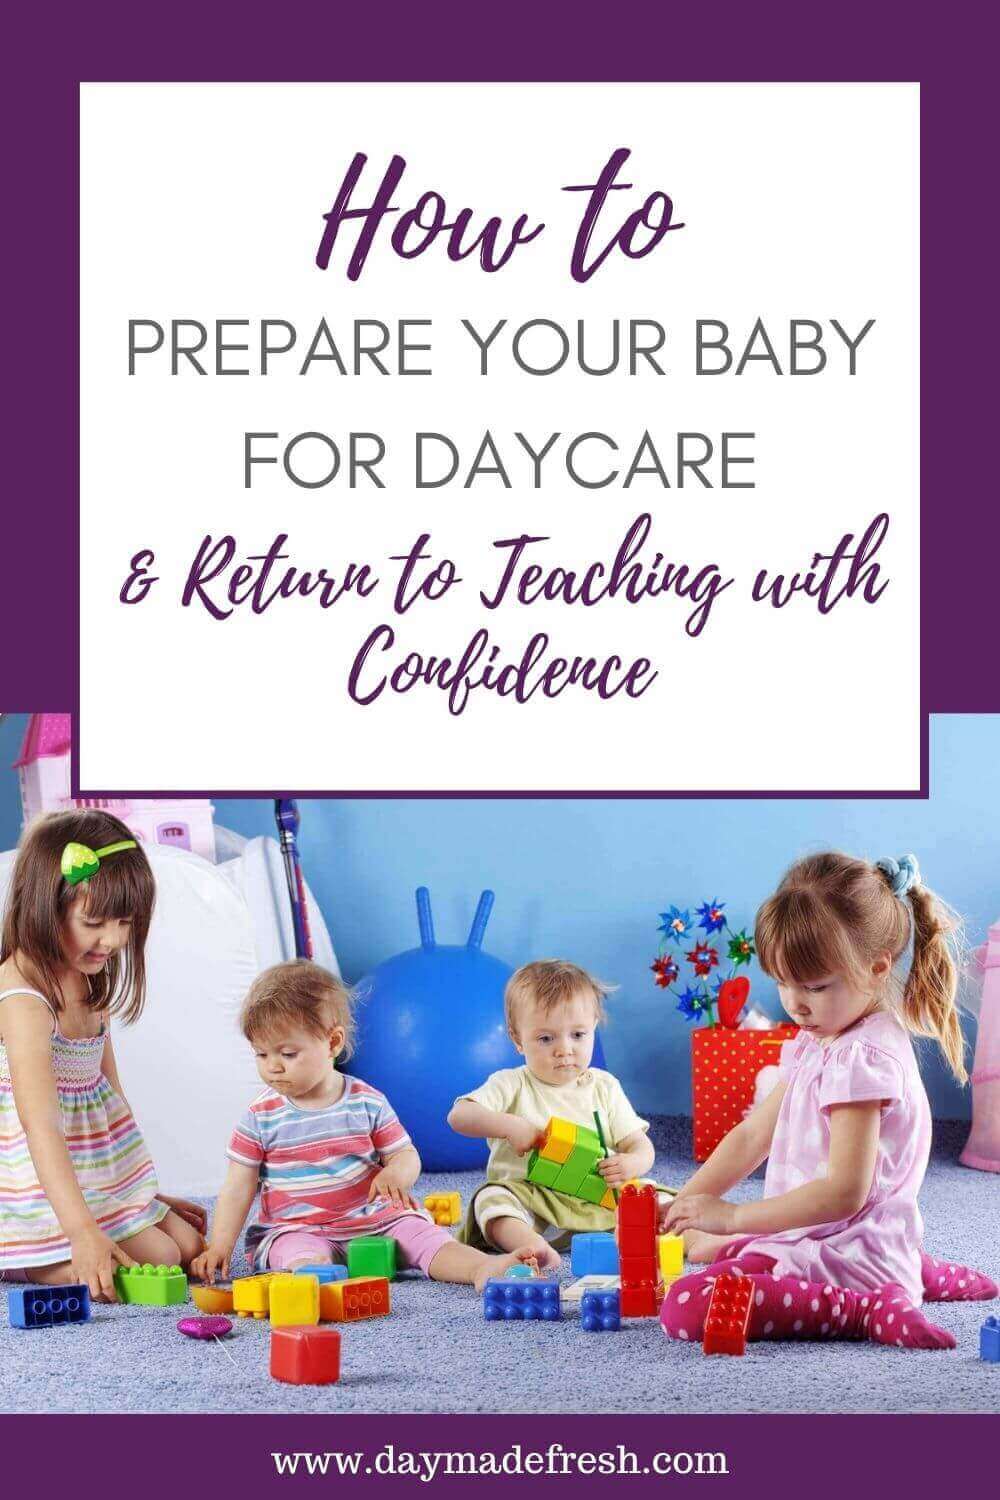 Image Text: How to Prepare Your Baby for Daycare & Return to Teaching with Confidence